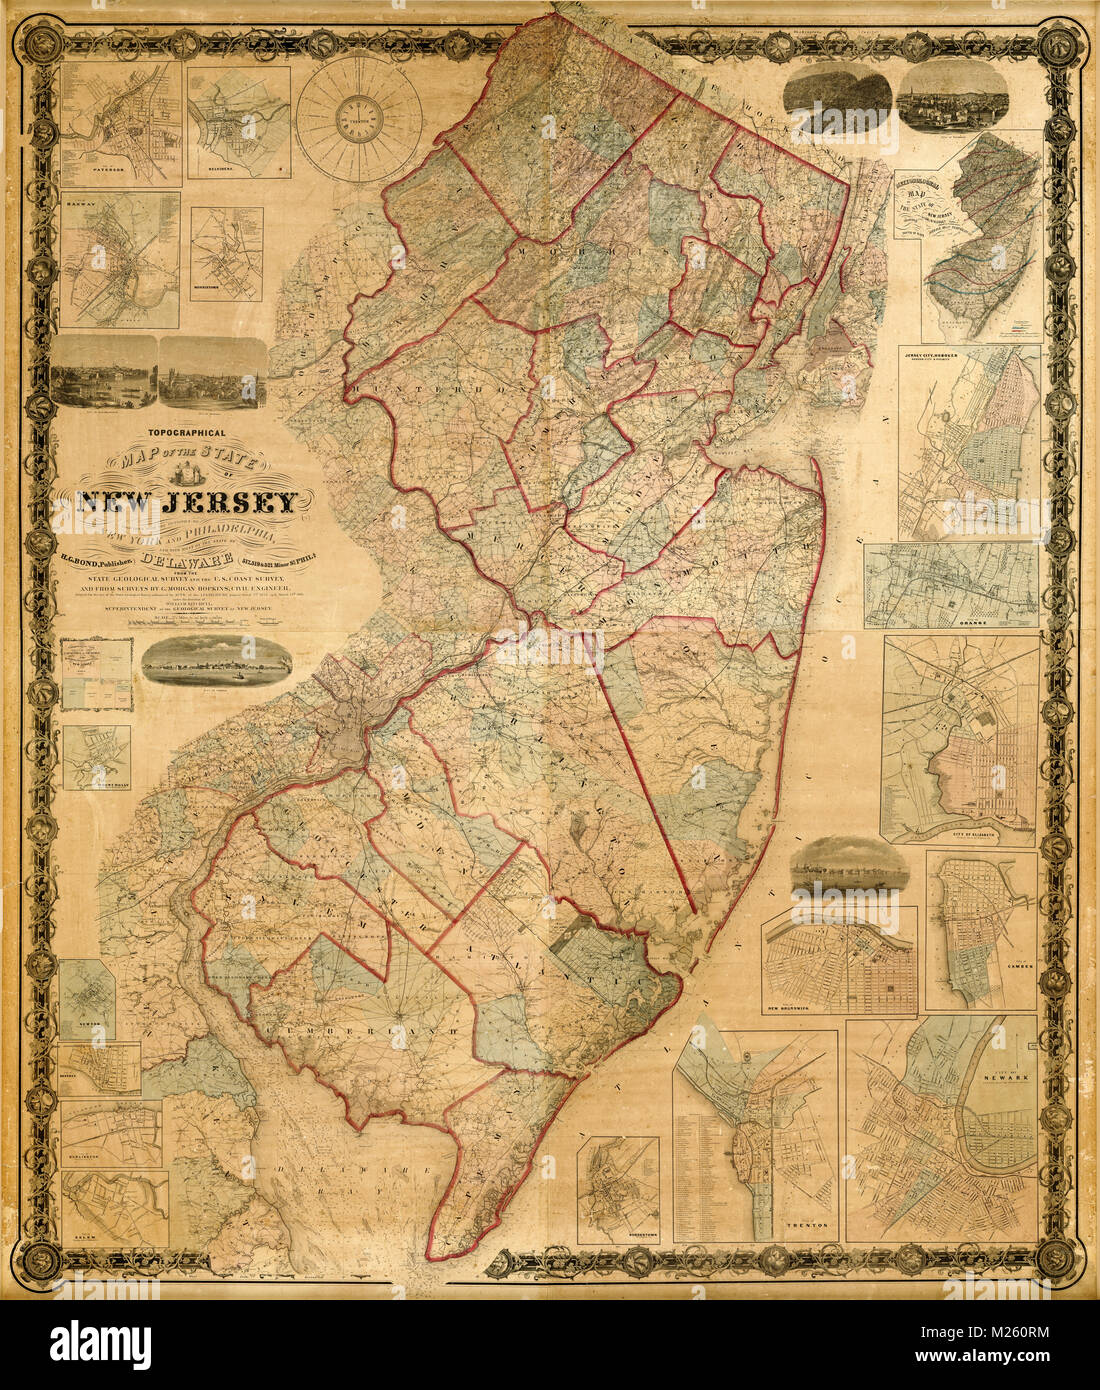 Historical map of New Jersey circa 1860. Stock Photo